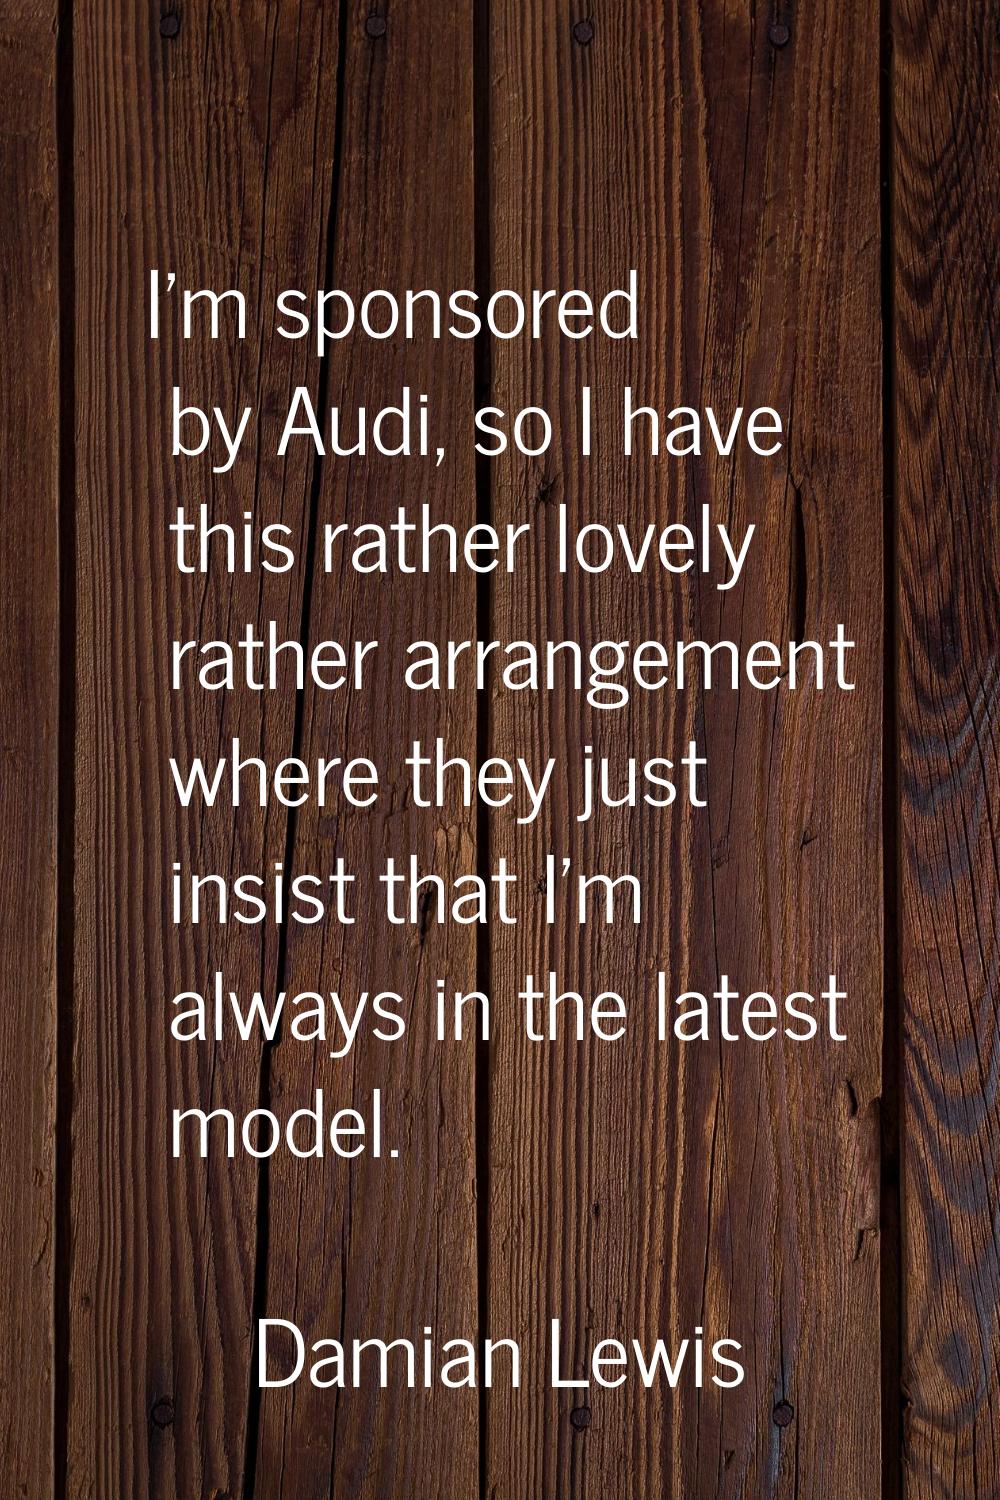 I'm sponsored by Audi, so I have this rather lovely rather arrangement where they just insist that 